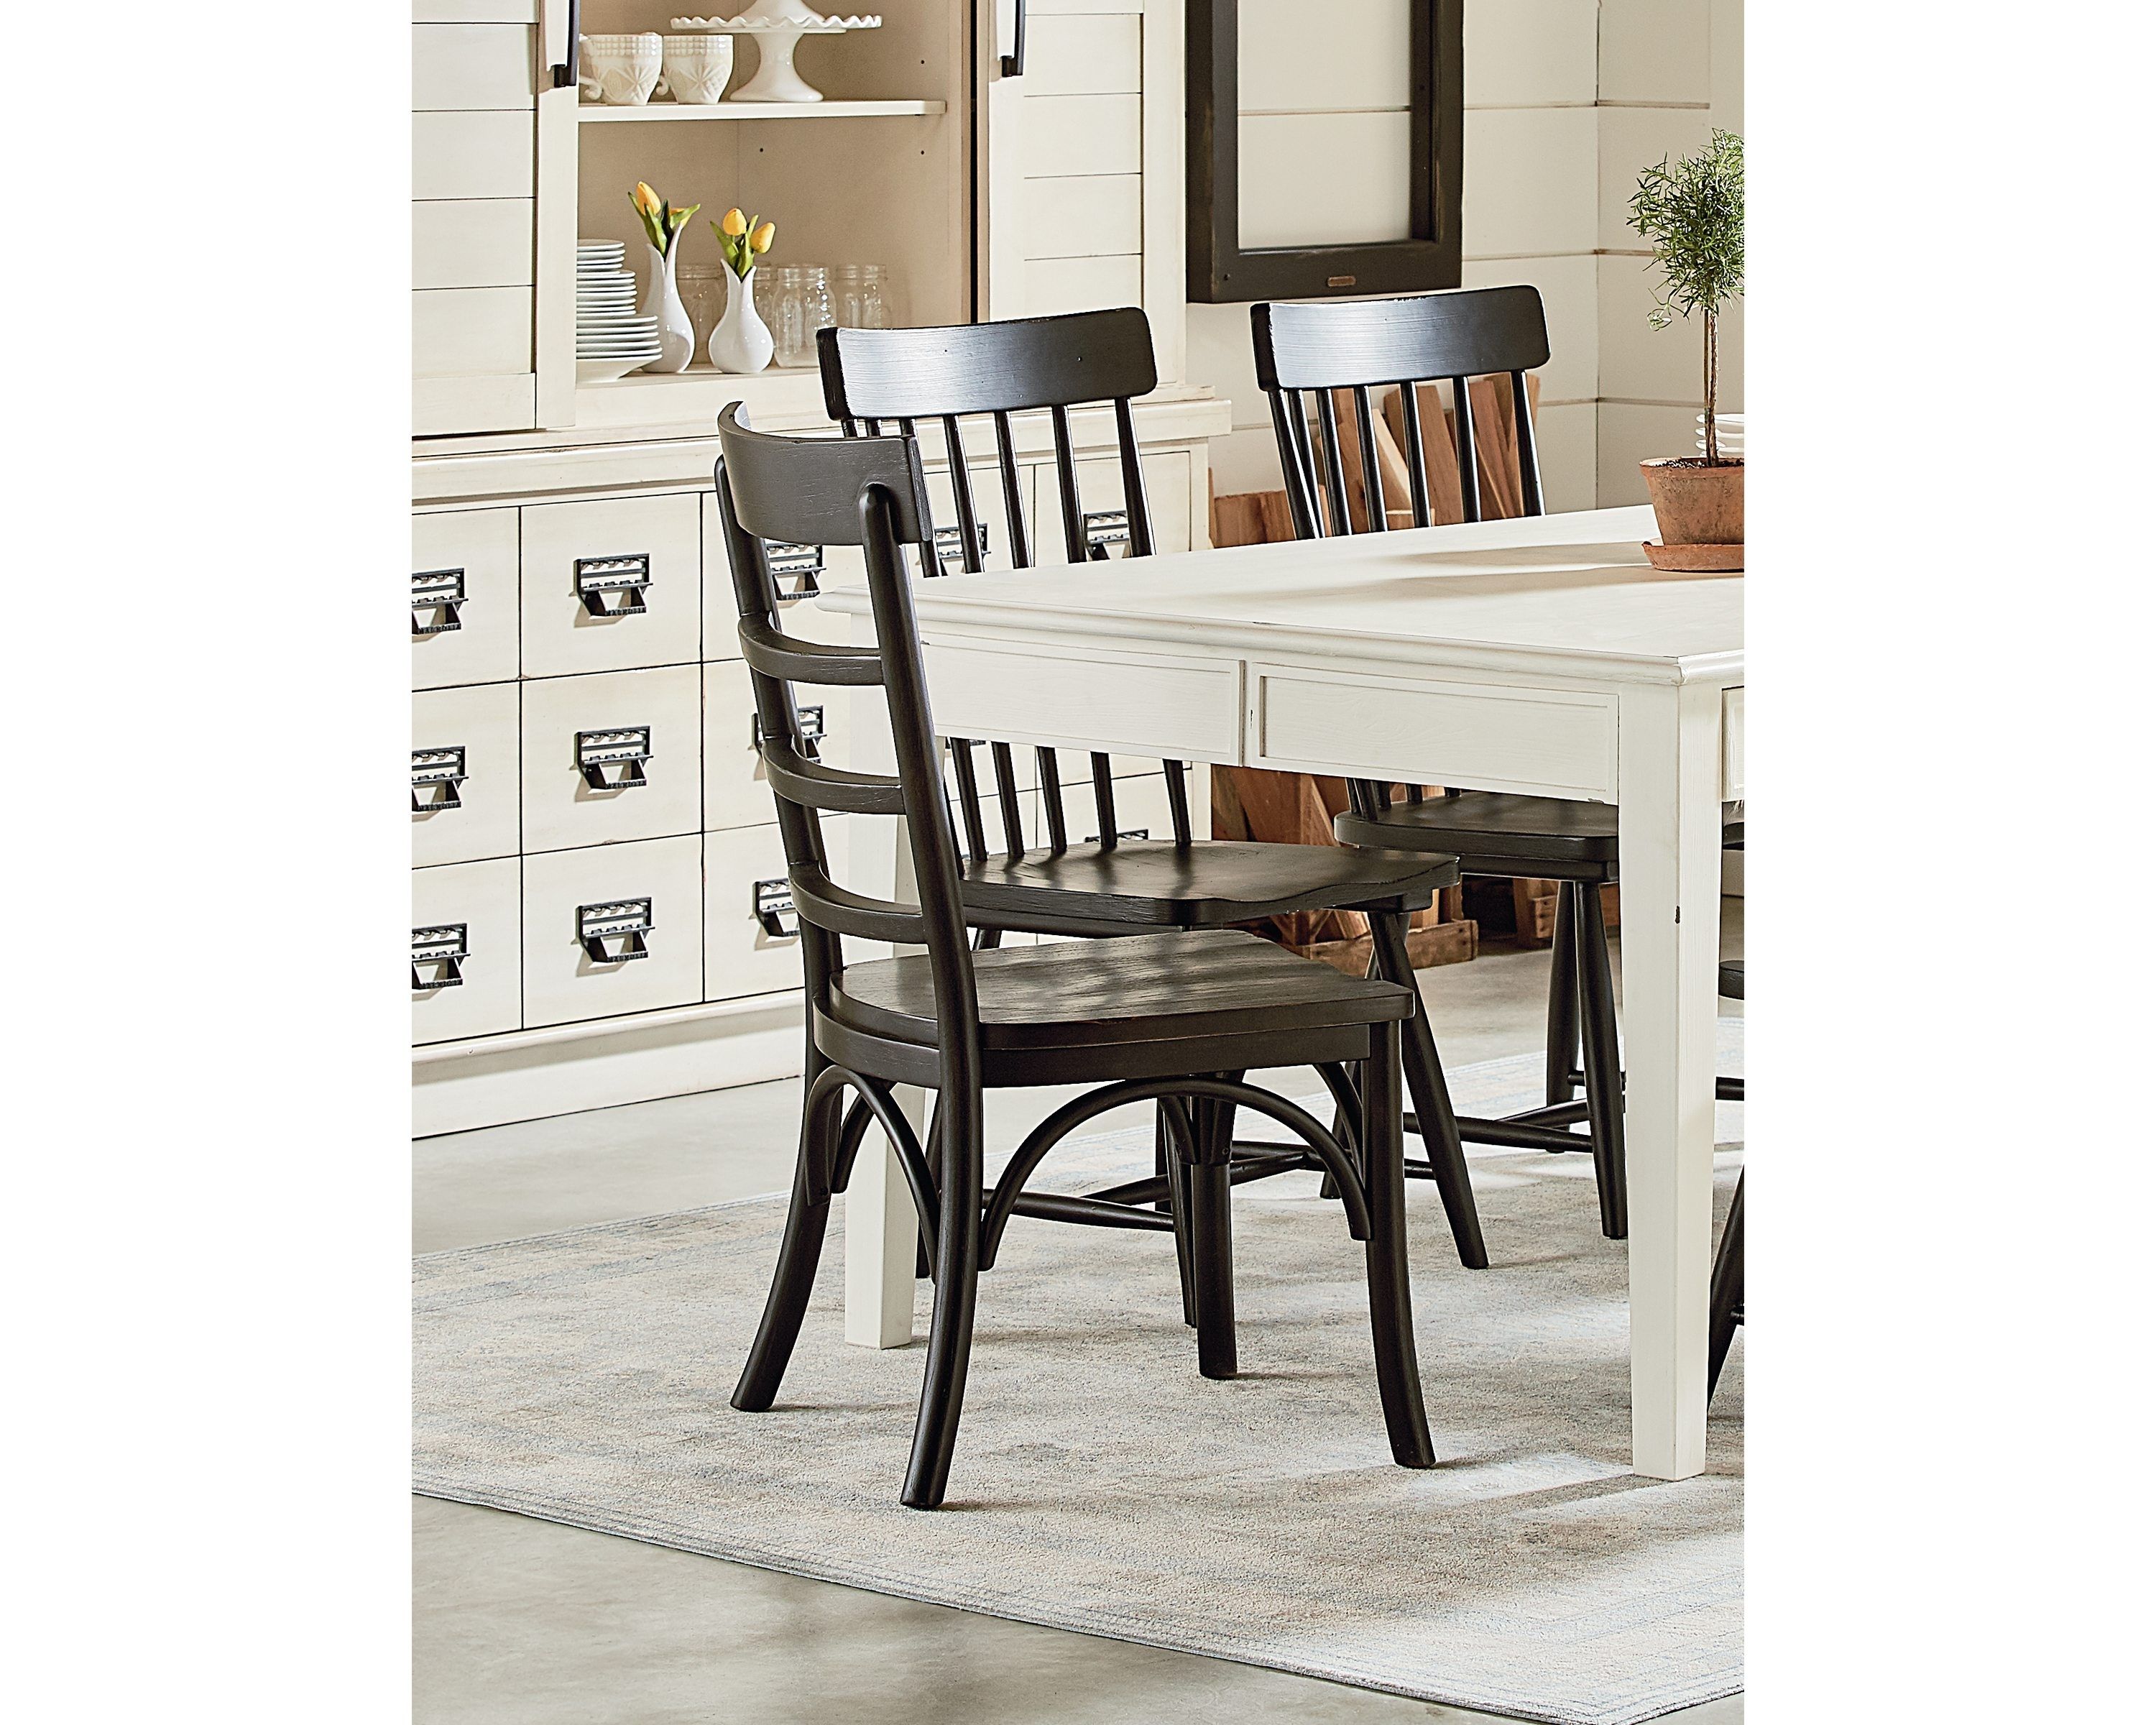 Well Liked Harper Side Chair – Magnolia Home With Regard To Magnolia Home Harper Chimney Side Chairs (View 6 of 20)